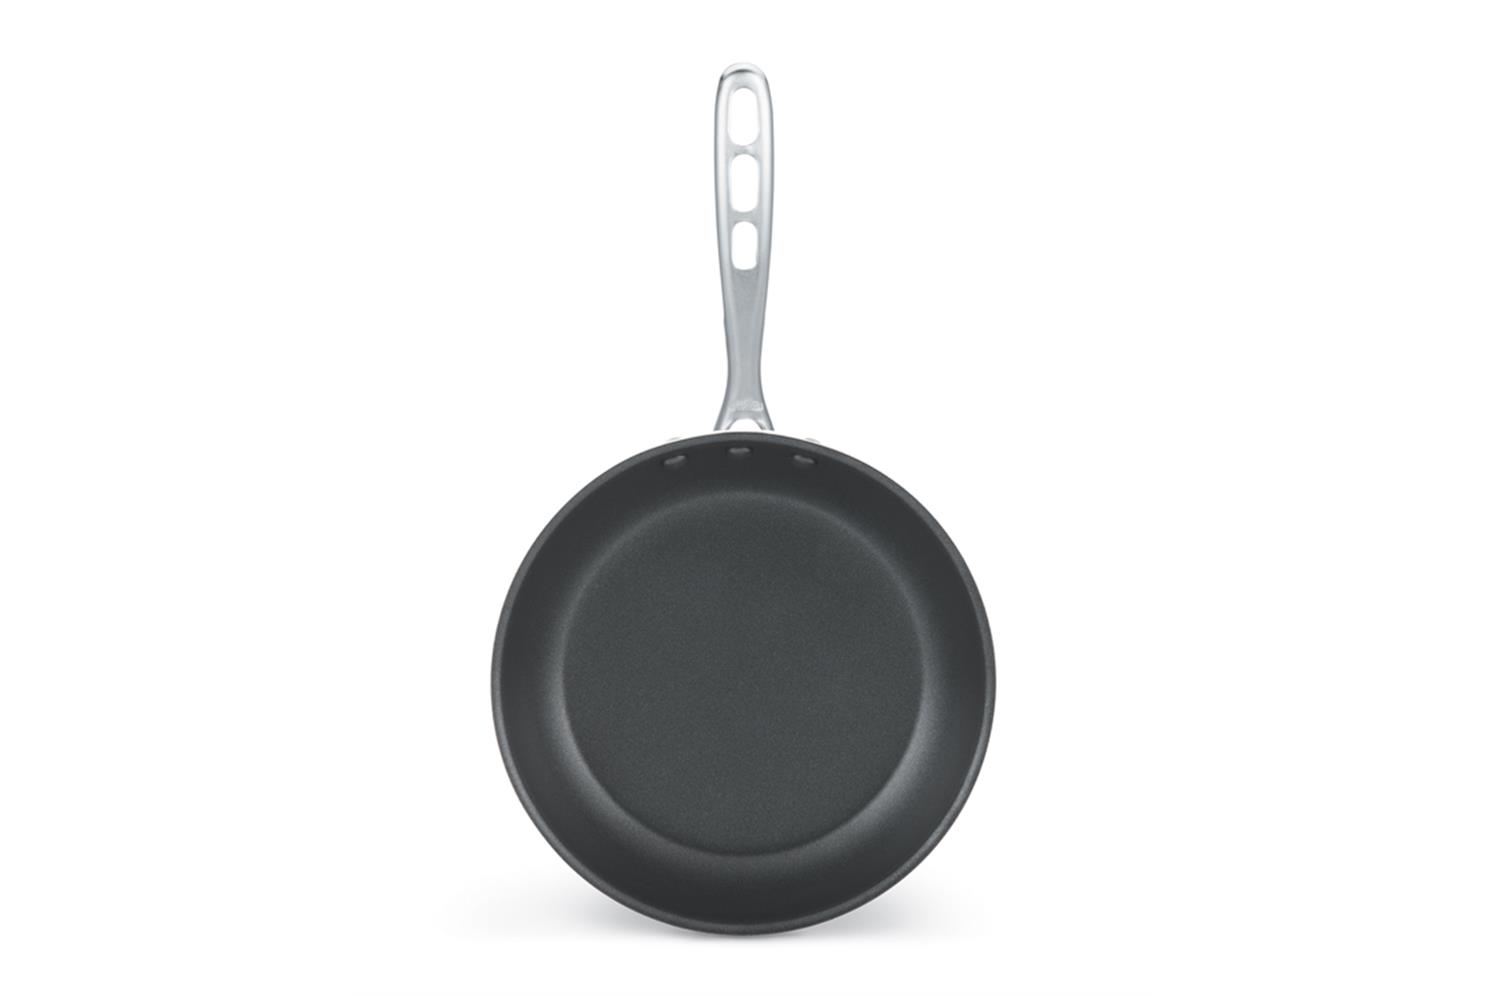 Vollrath 67954 Wear-Ever Fry Pans with CeramiGuard II Interior with TriVent Handle